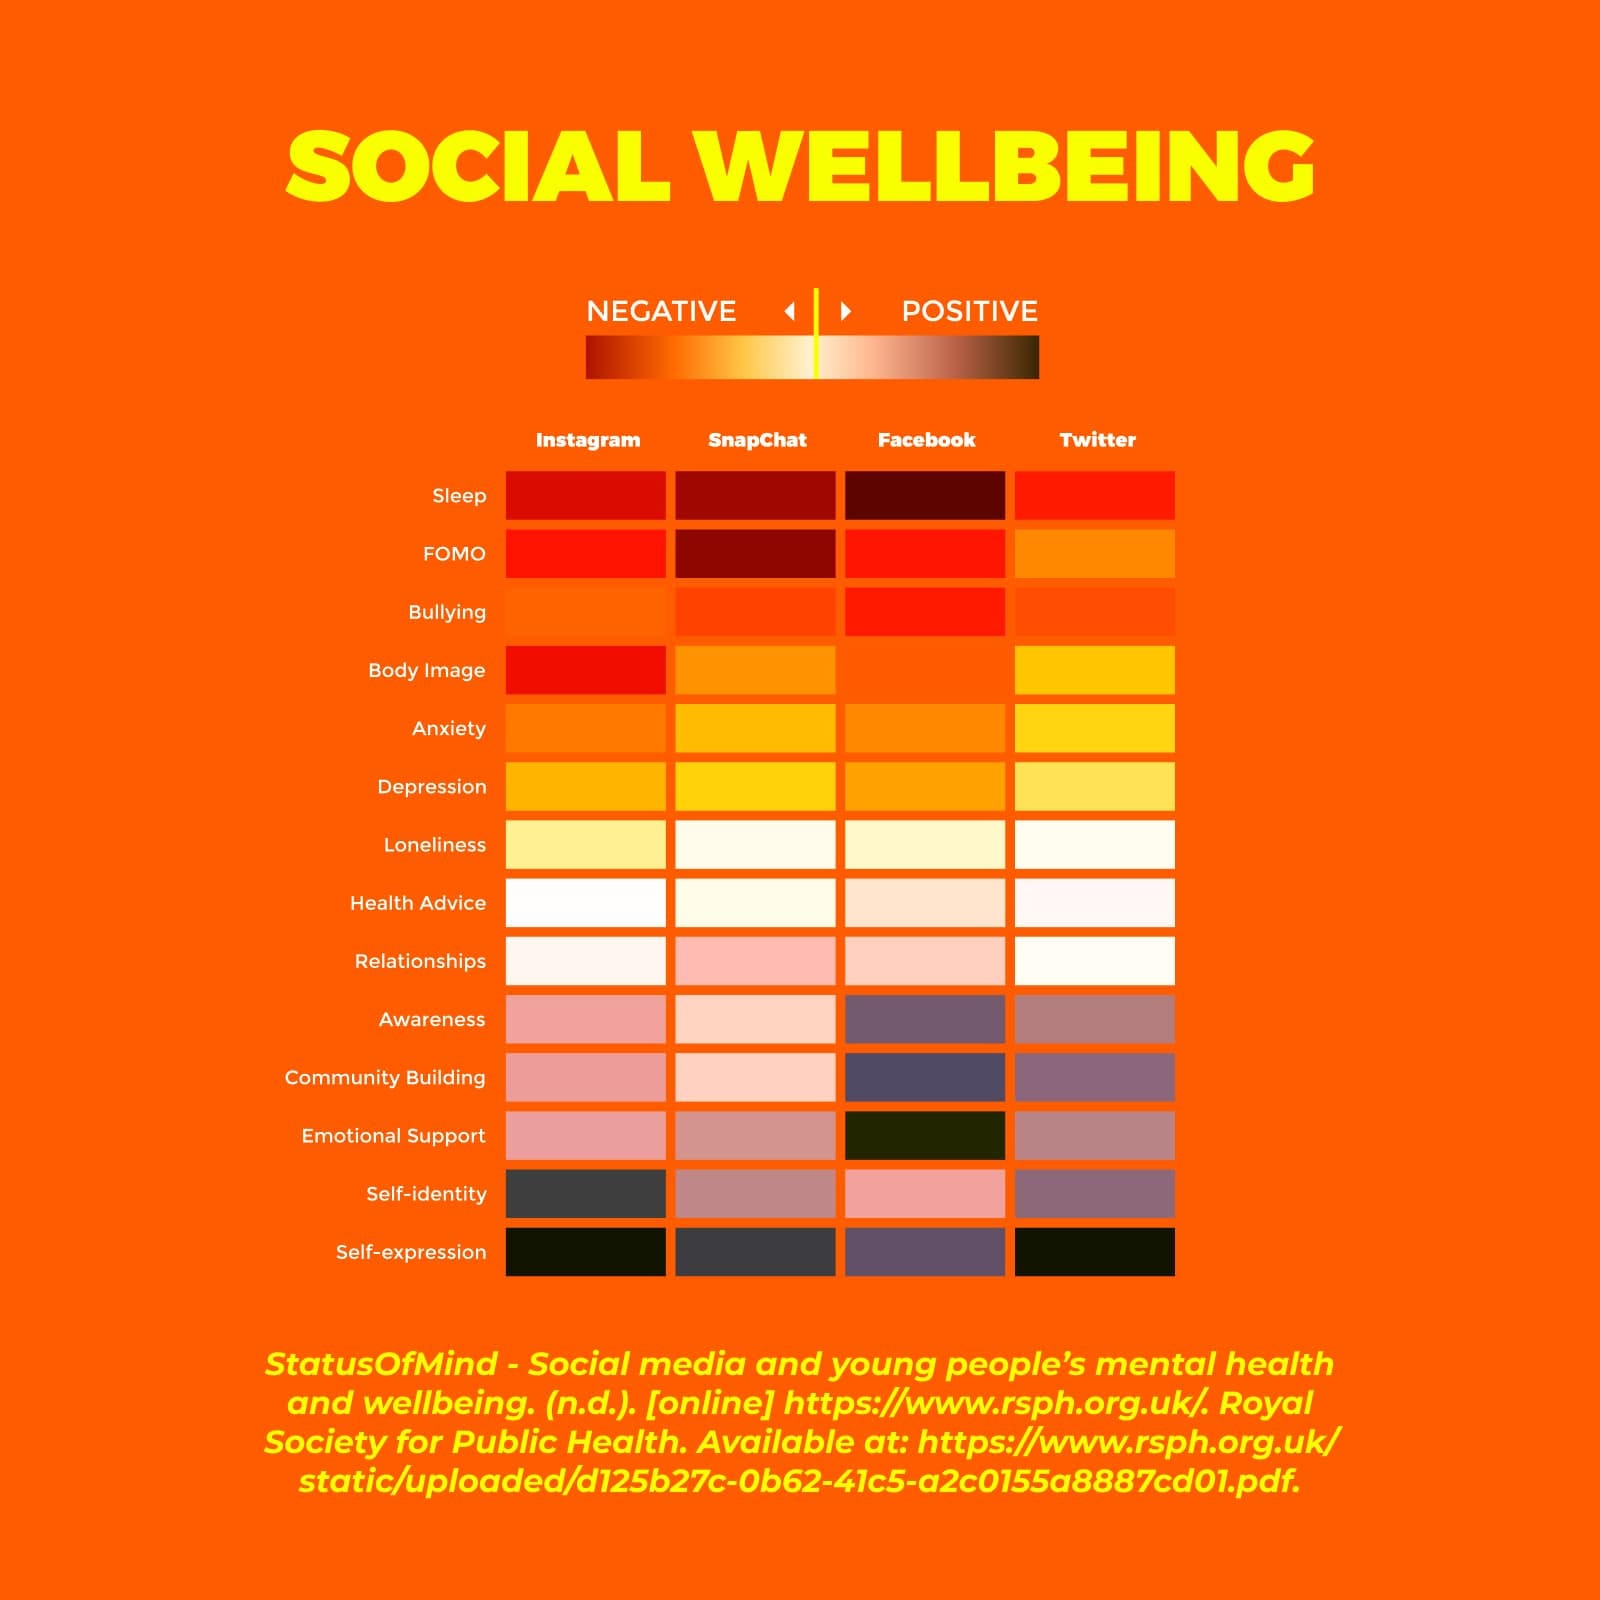 Chart of social wellbeing by teens based on social platform